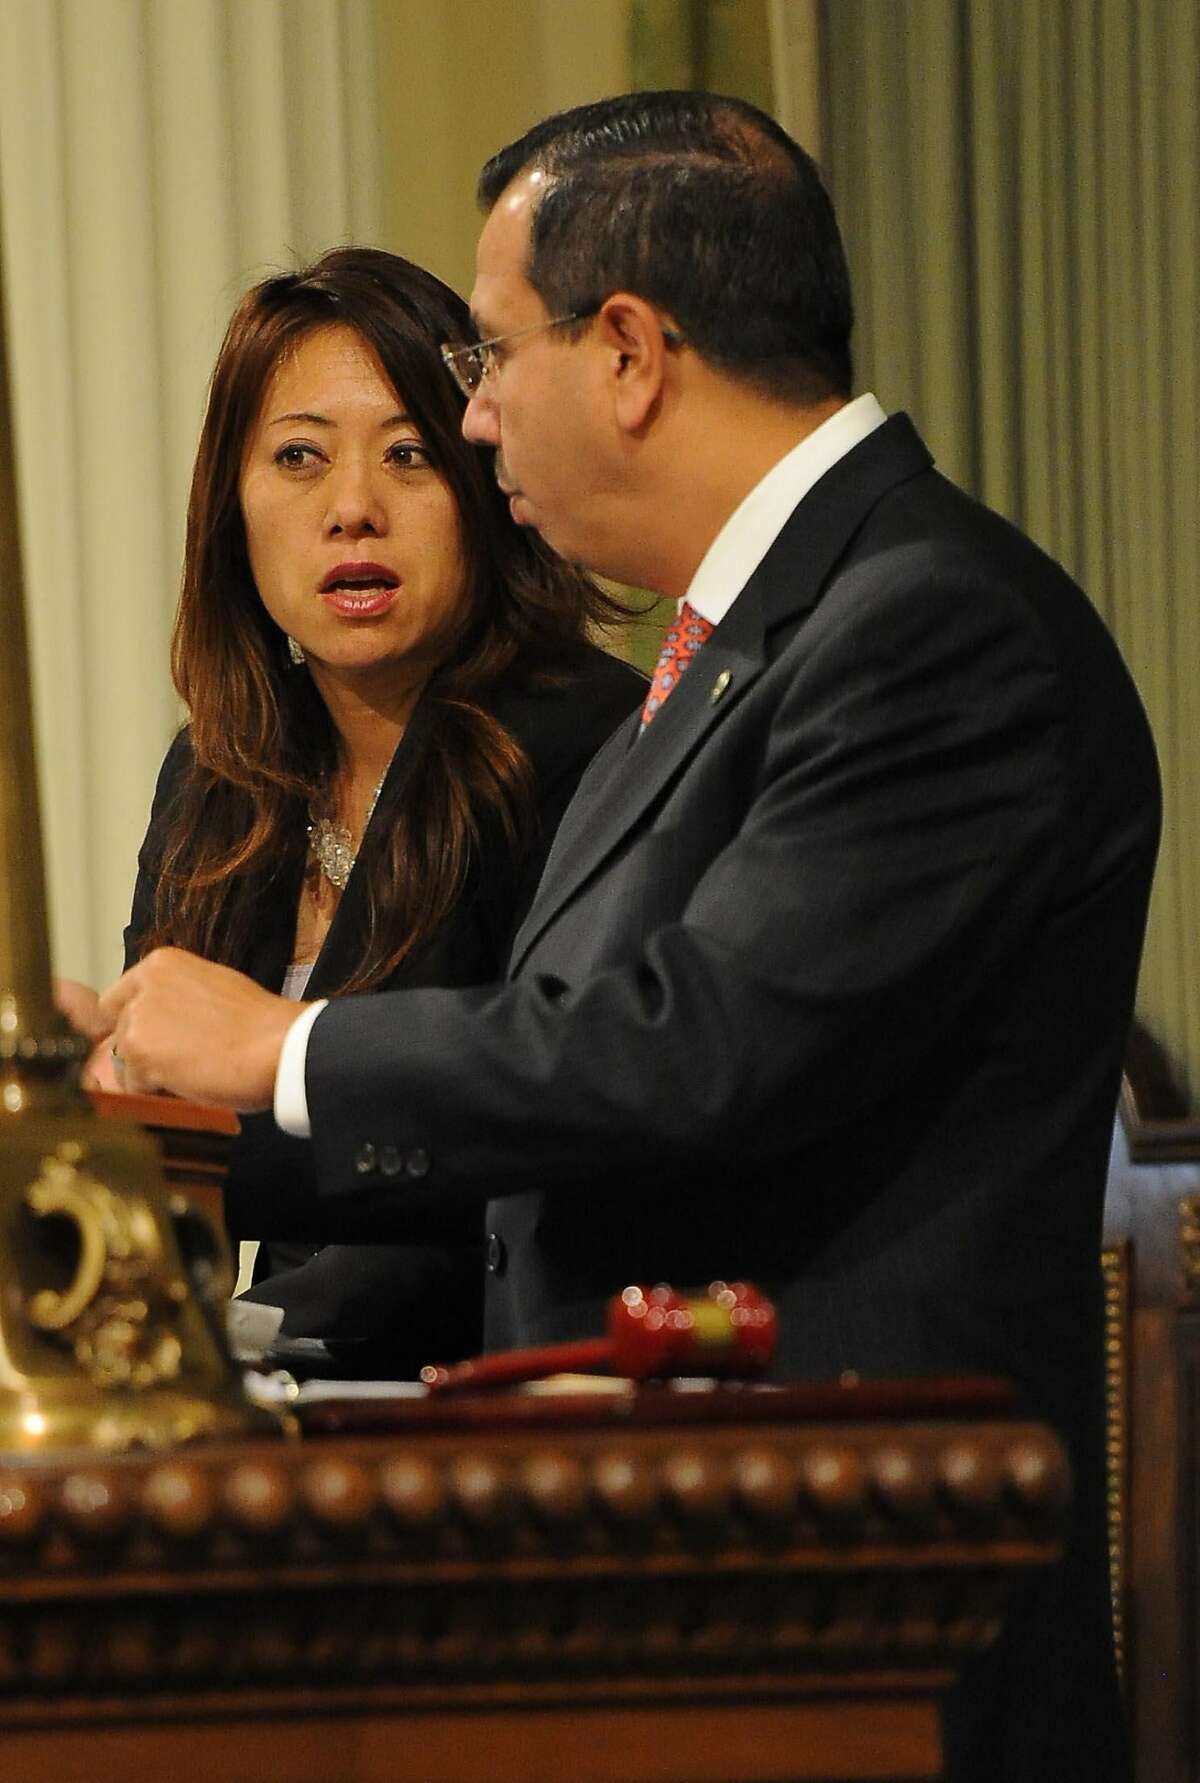 Assembly Members Fiona Ma and Tony Mendoza are seen during session in Sacramento on August 31, 2012. The Legislature met for its final day of the two-year legislative session.